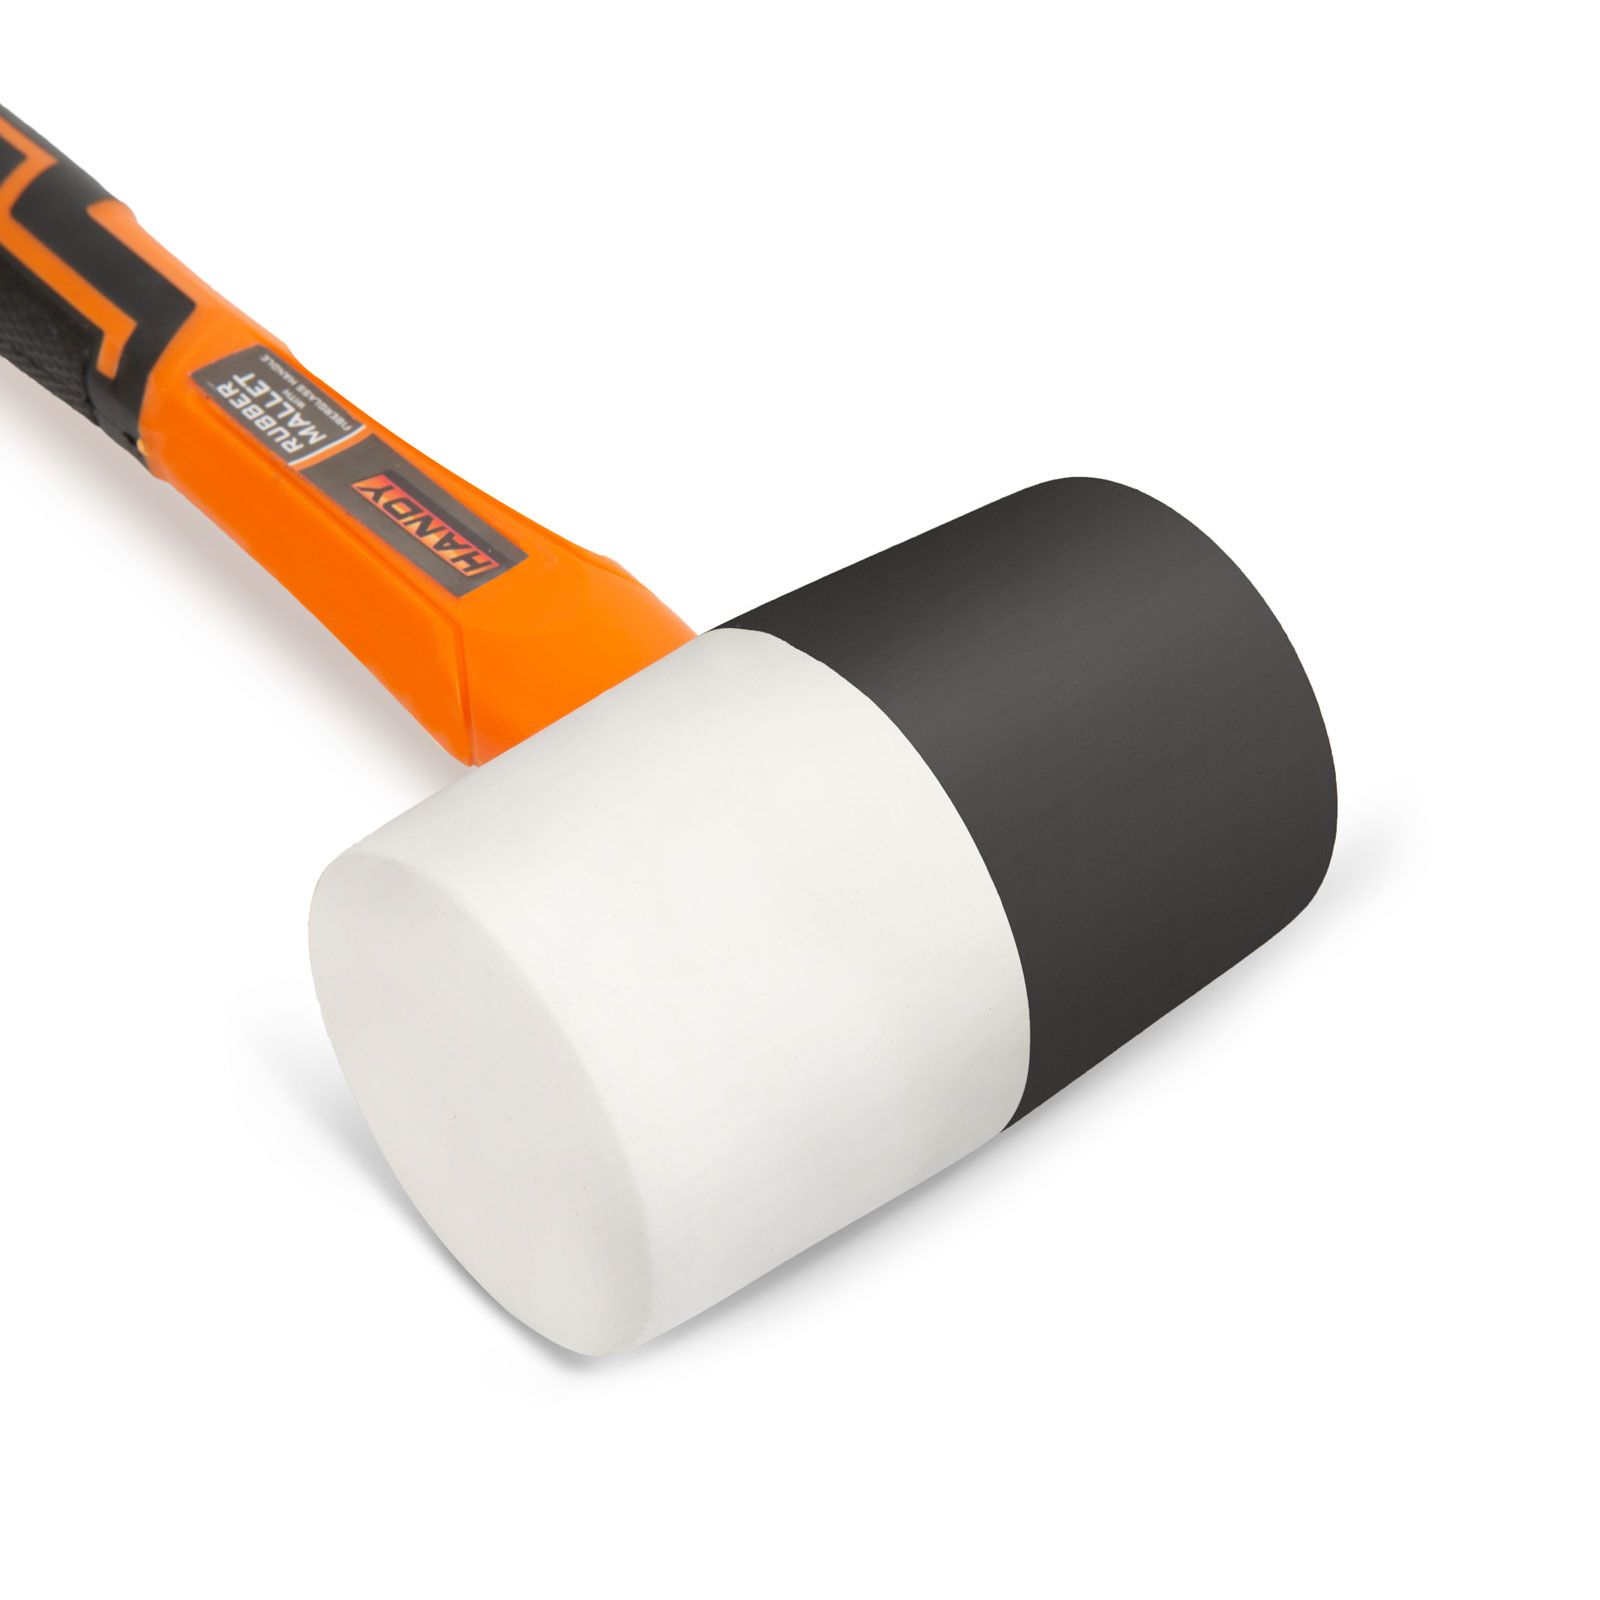 Rubber mallet with fiberglass handle - 340 g thumb